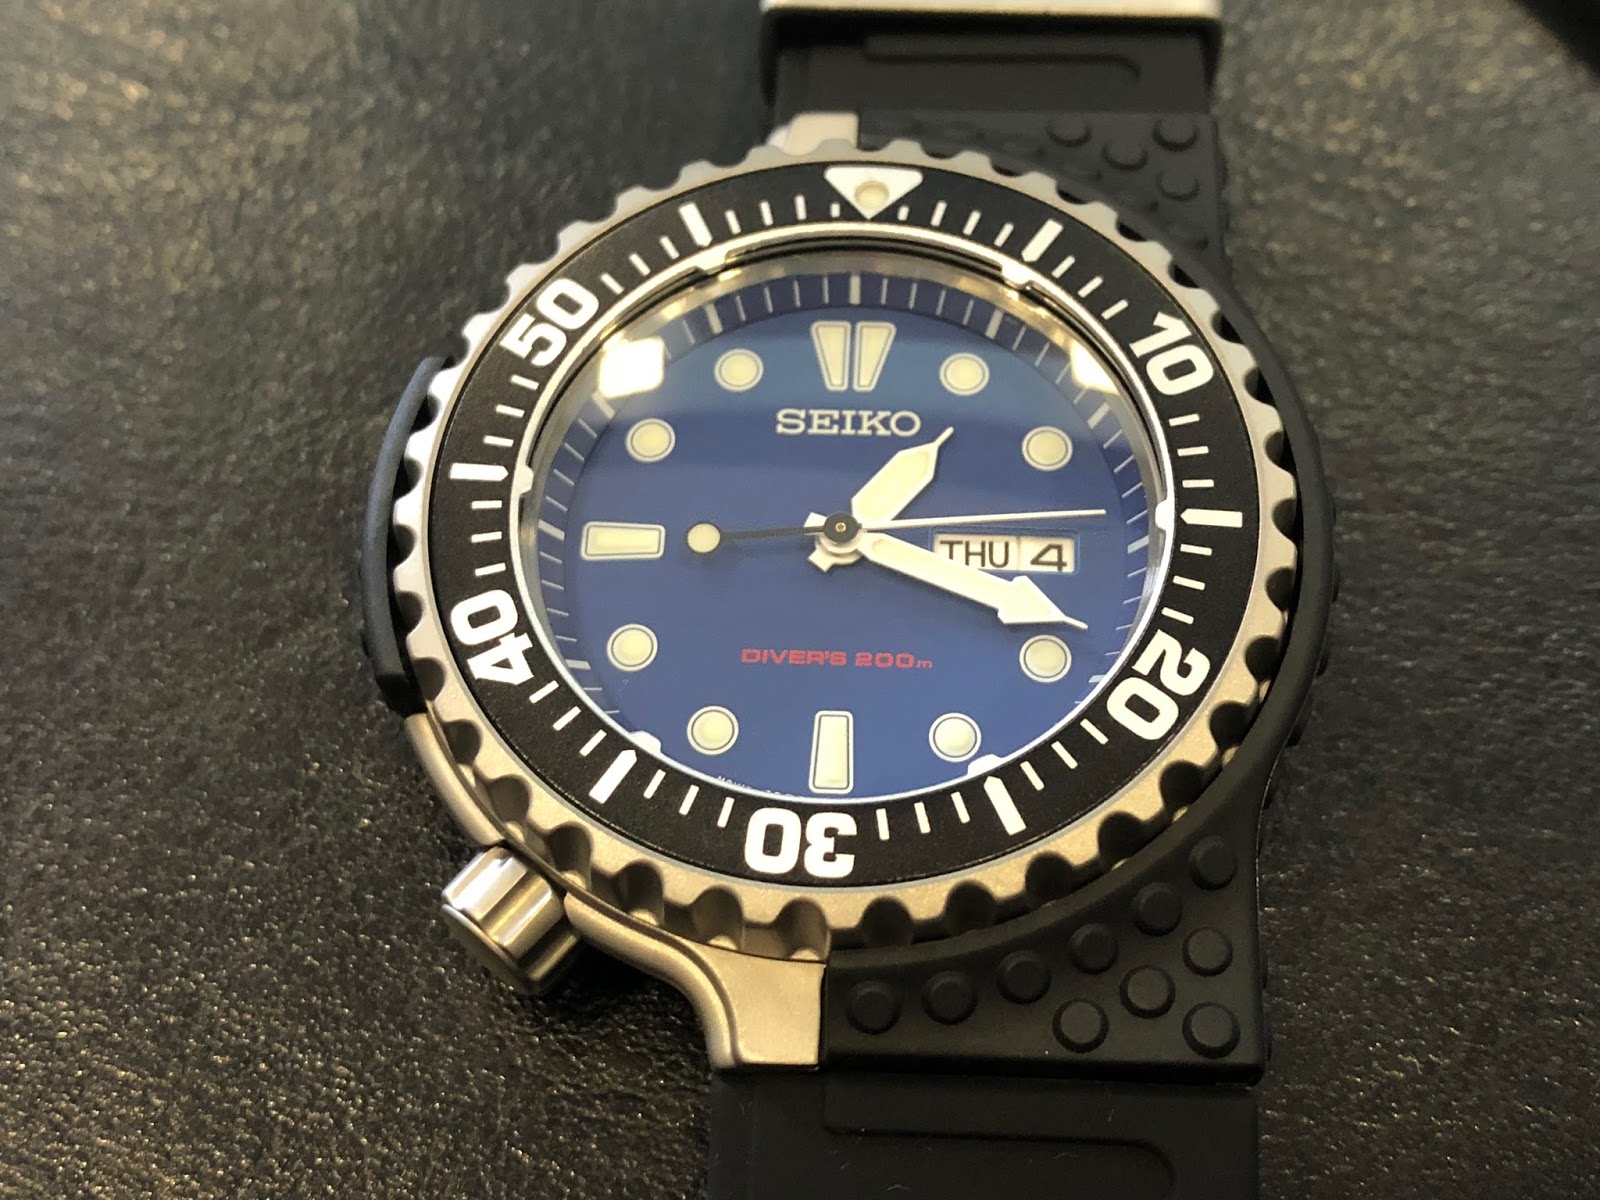 My Eastern Watch Collection: Seiko PROSPEX Diver Scuba GIUGIARO DESIGN  Limited Edition SBEE001 (Similar to SBEE002) – A Good Conversational  Starter, A Review (plus Video)